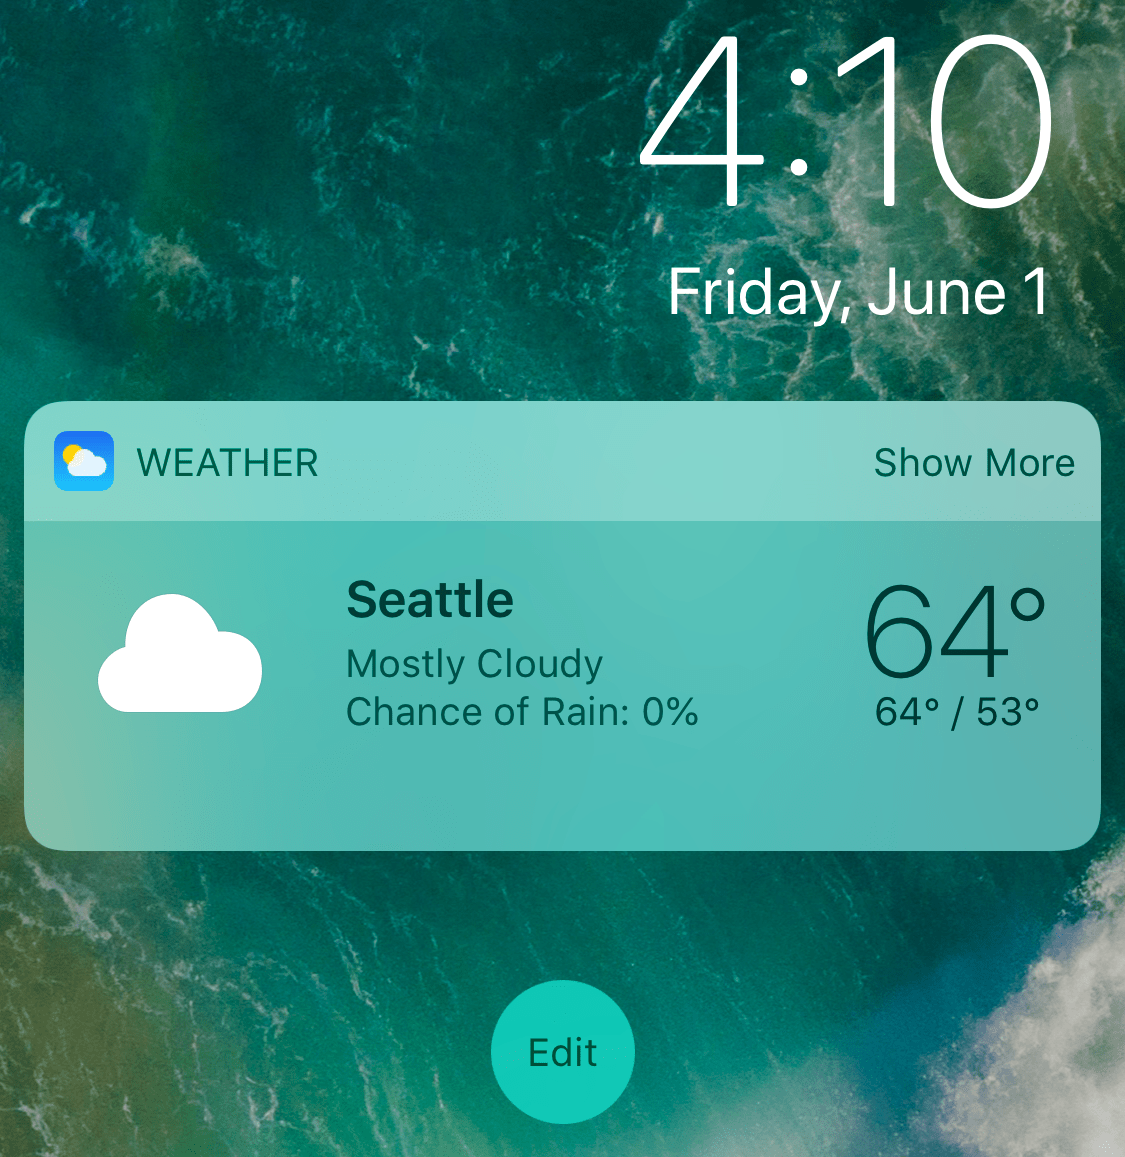 The Today view with the Weather widget shown.